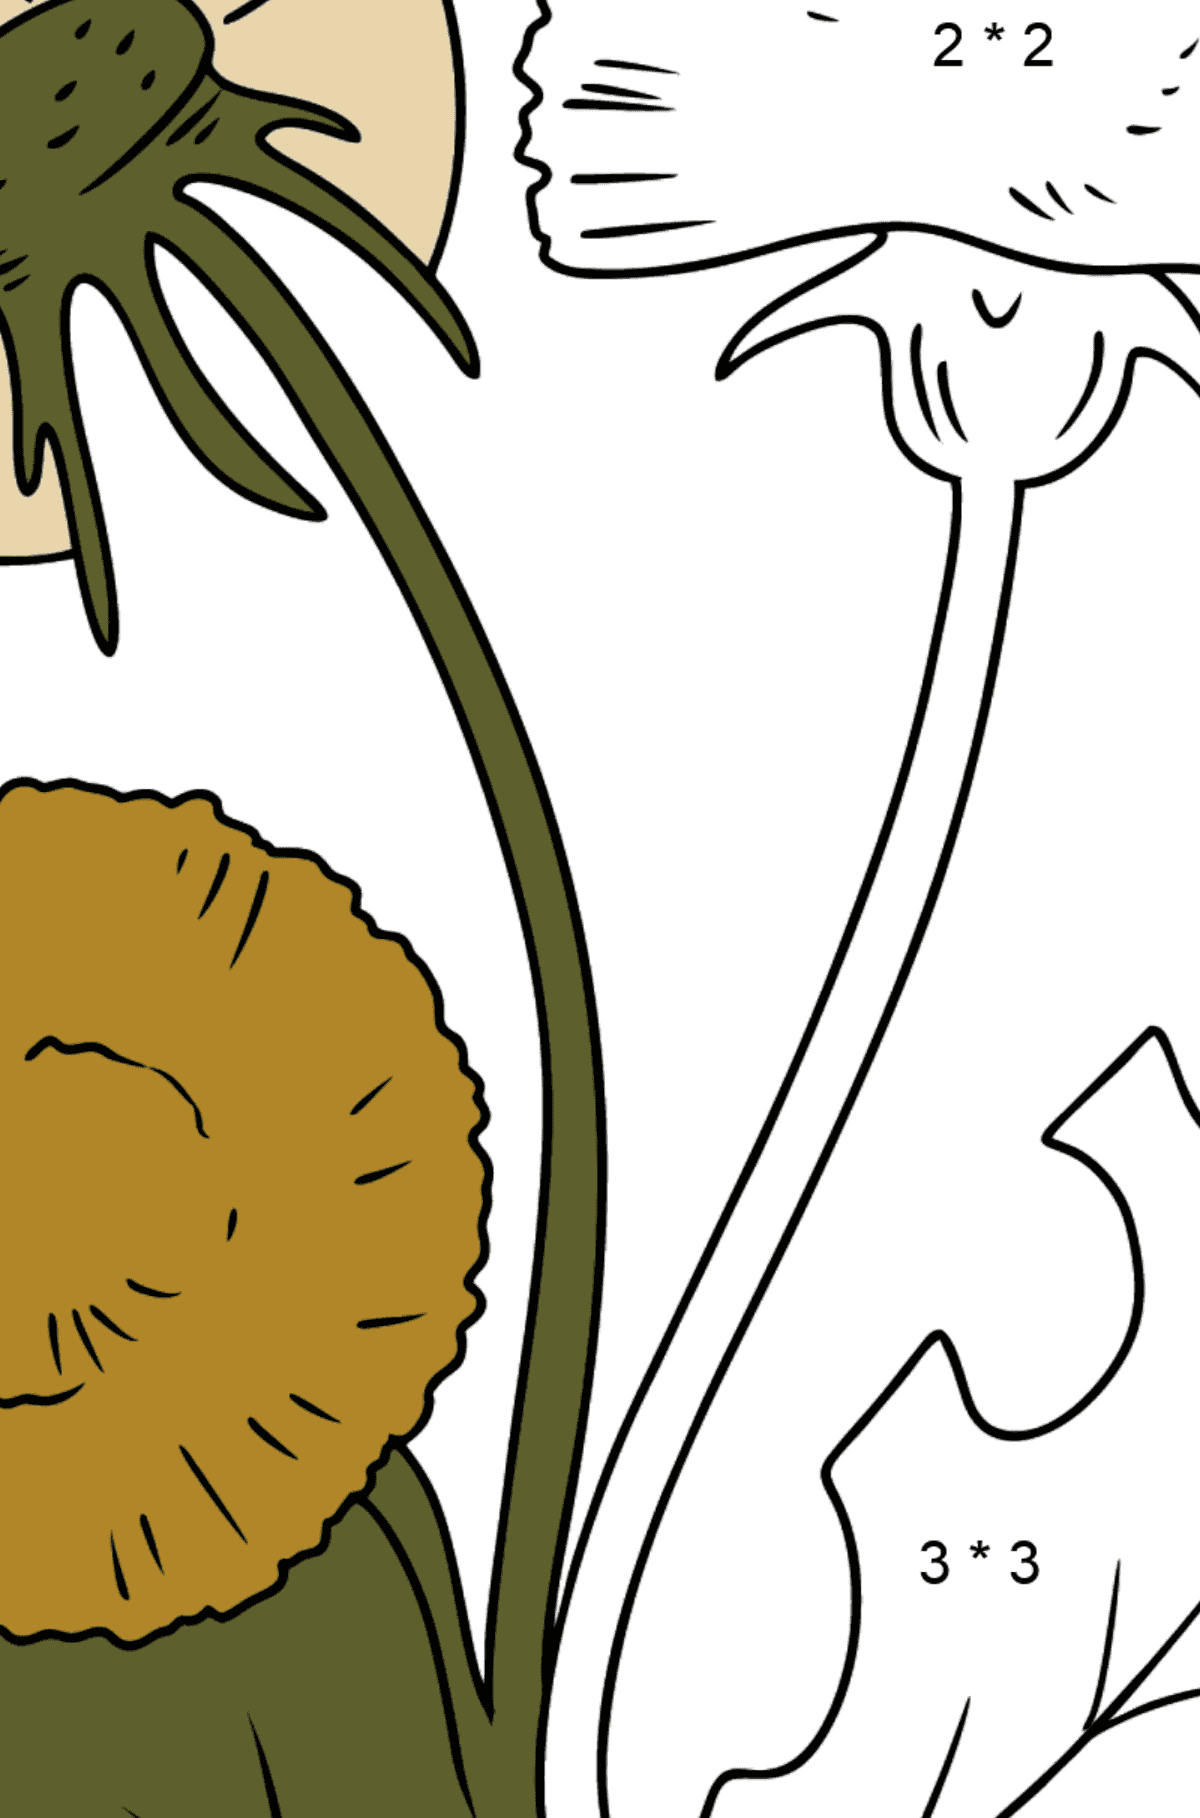 Dandelion Coloring Page - Math Coloring - Multiplication for Kids